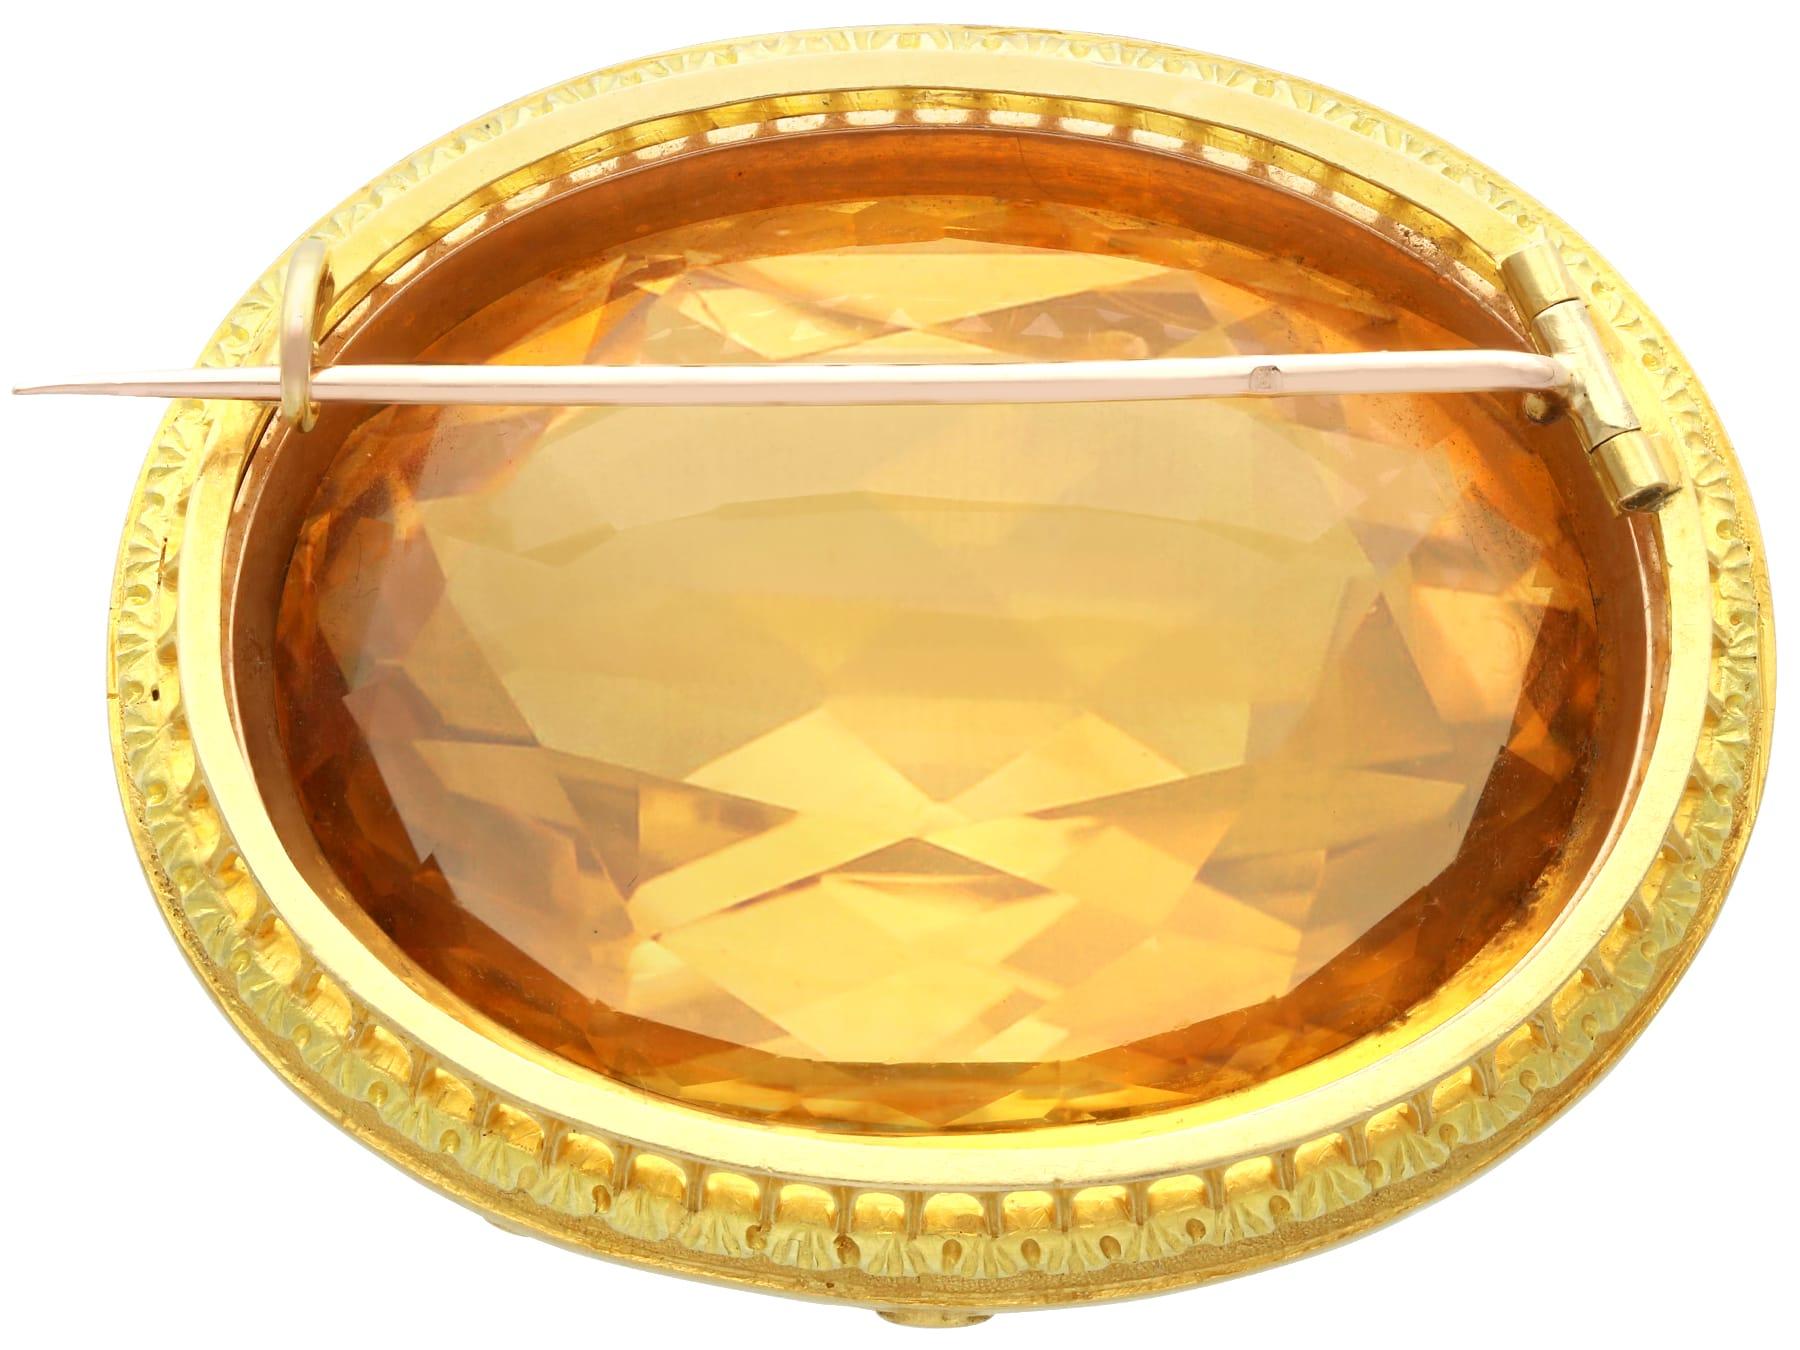 Oval Cut Antique Victorian 85.49 Carat Citrine and Yellow Gold Brooch, Circa 1850